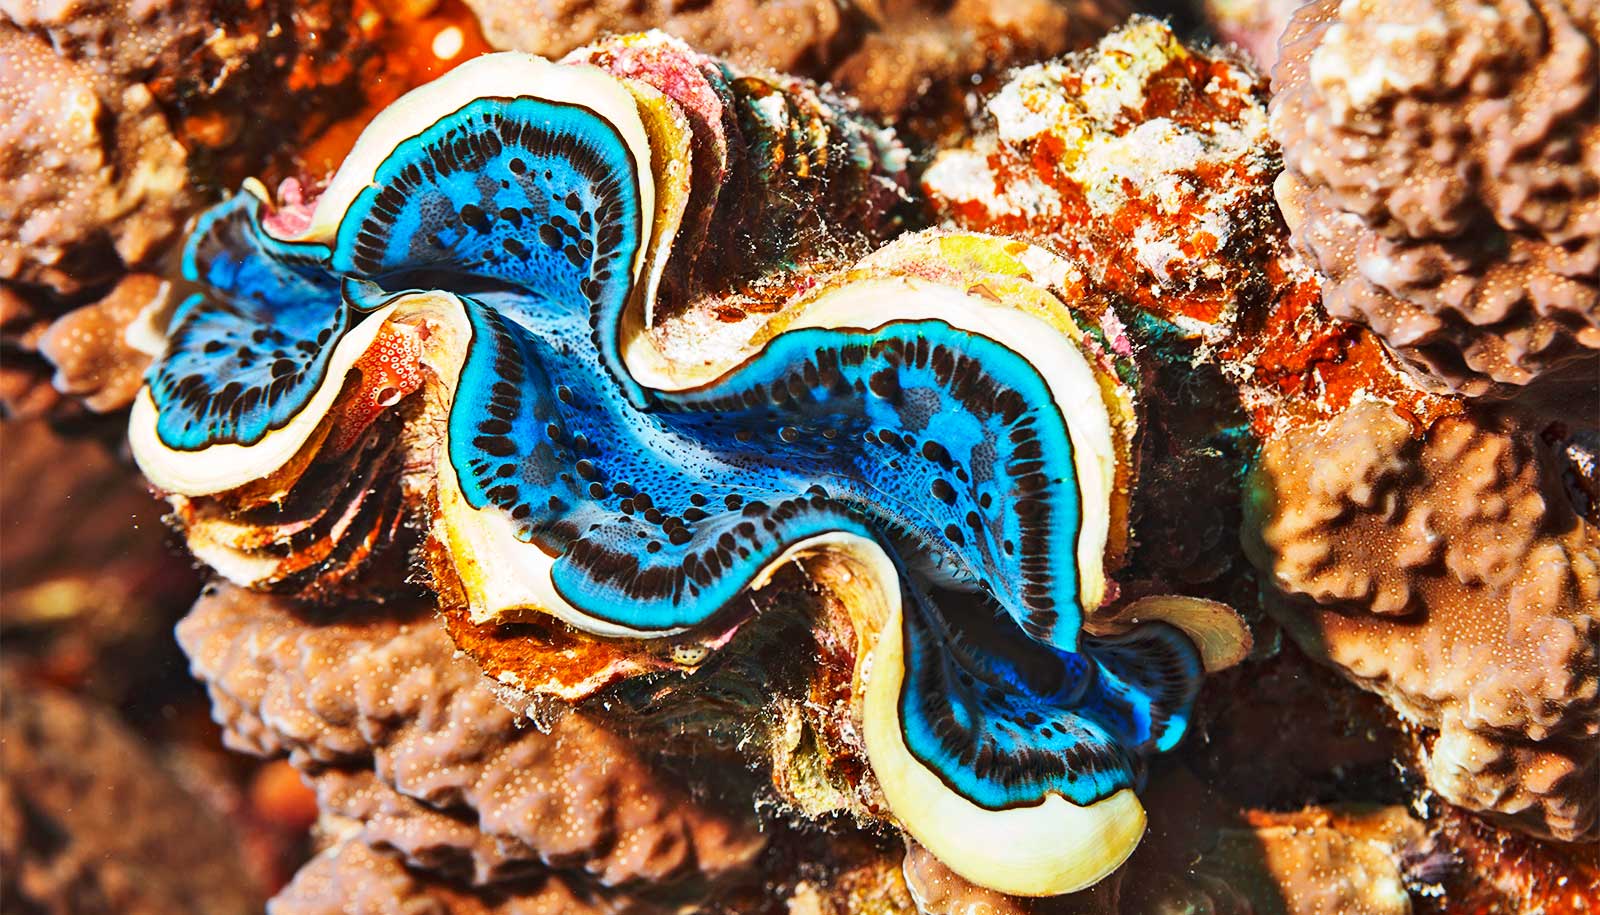 Giant clams could inspire better solar power systems [Video]